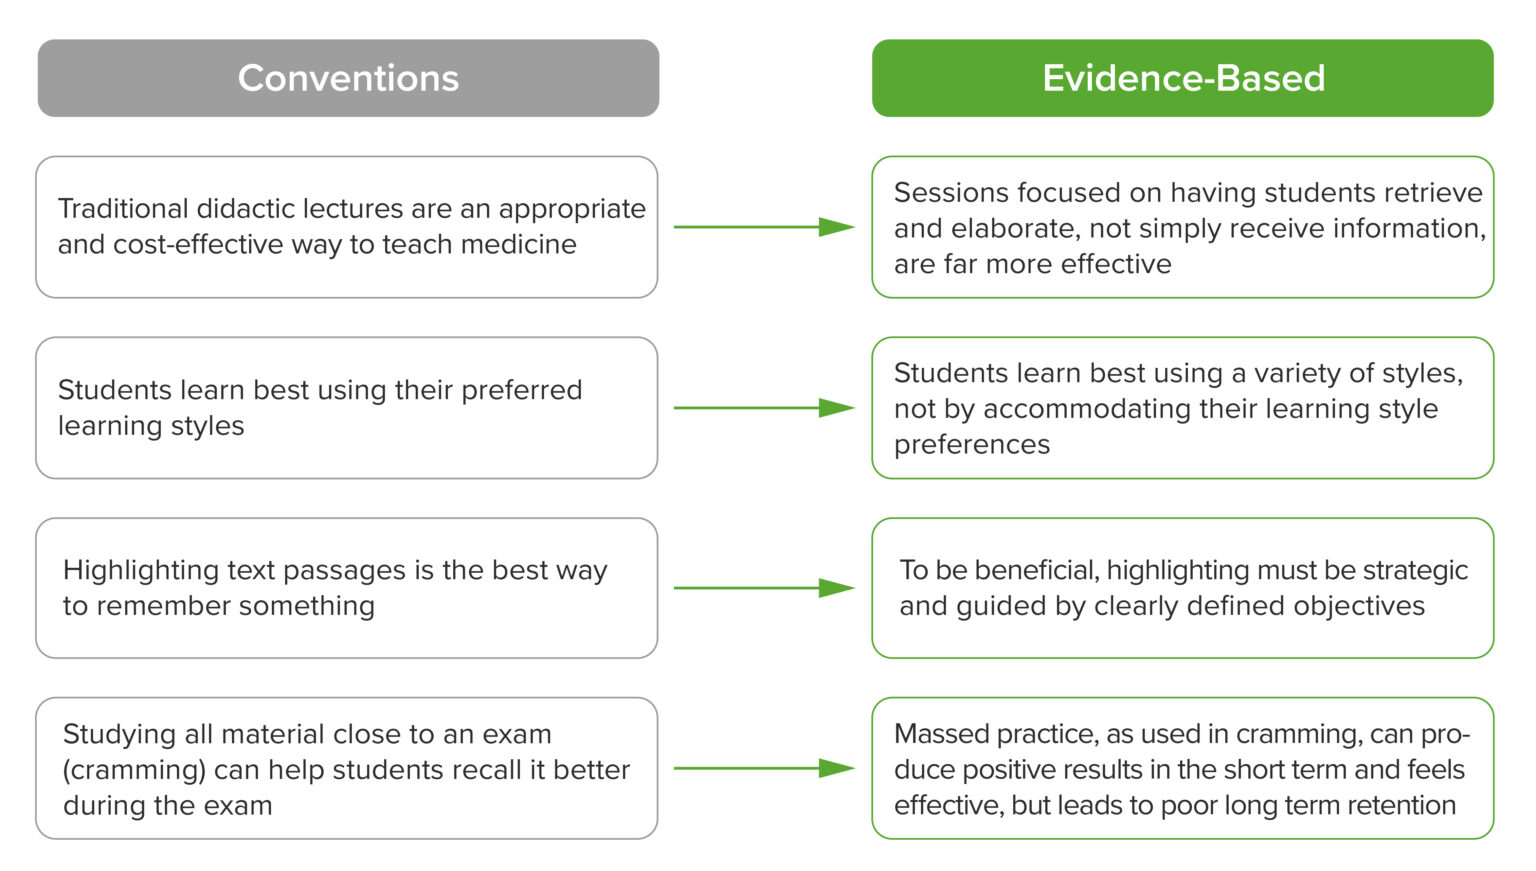 How to Apply Evidence to Tackle Misconceptions in Medical Education